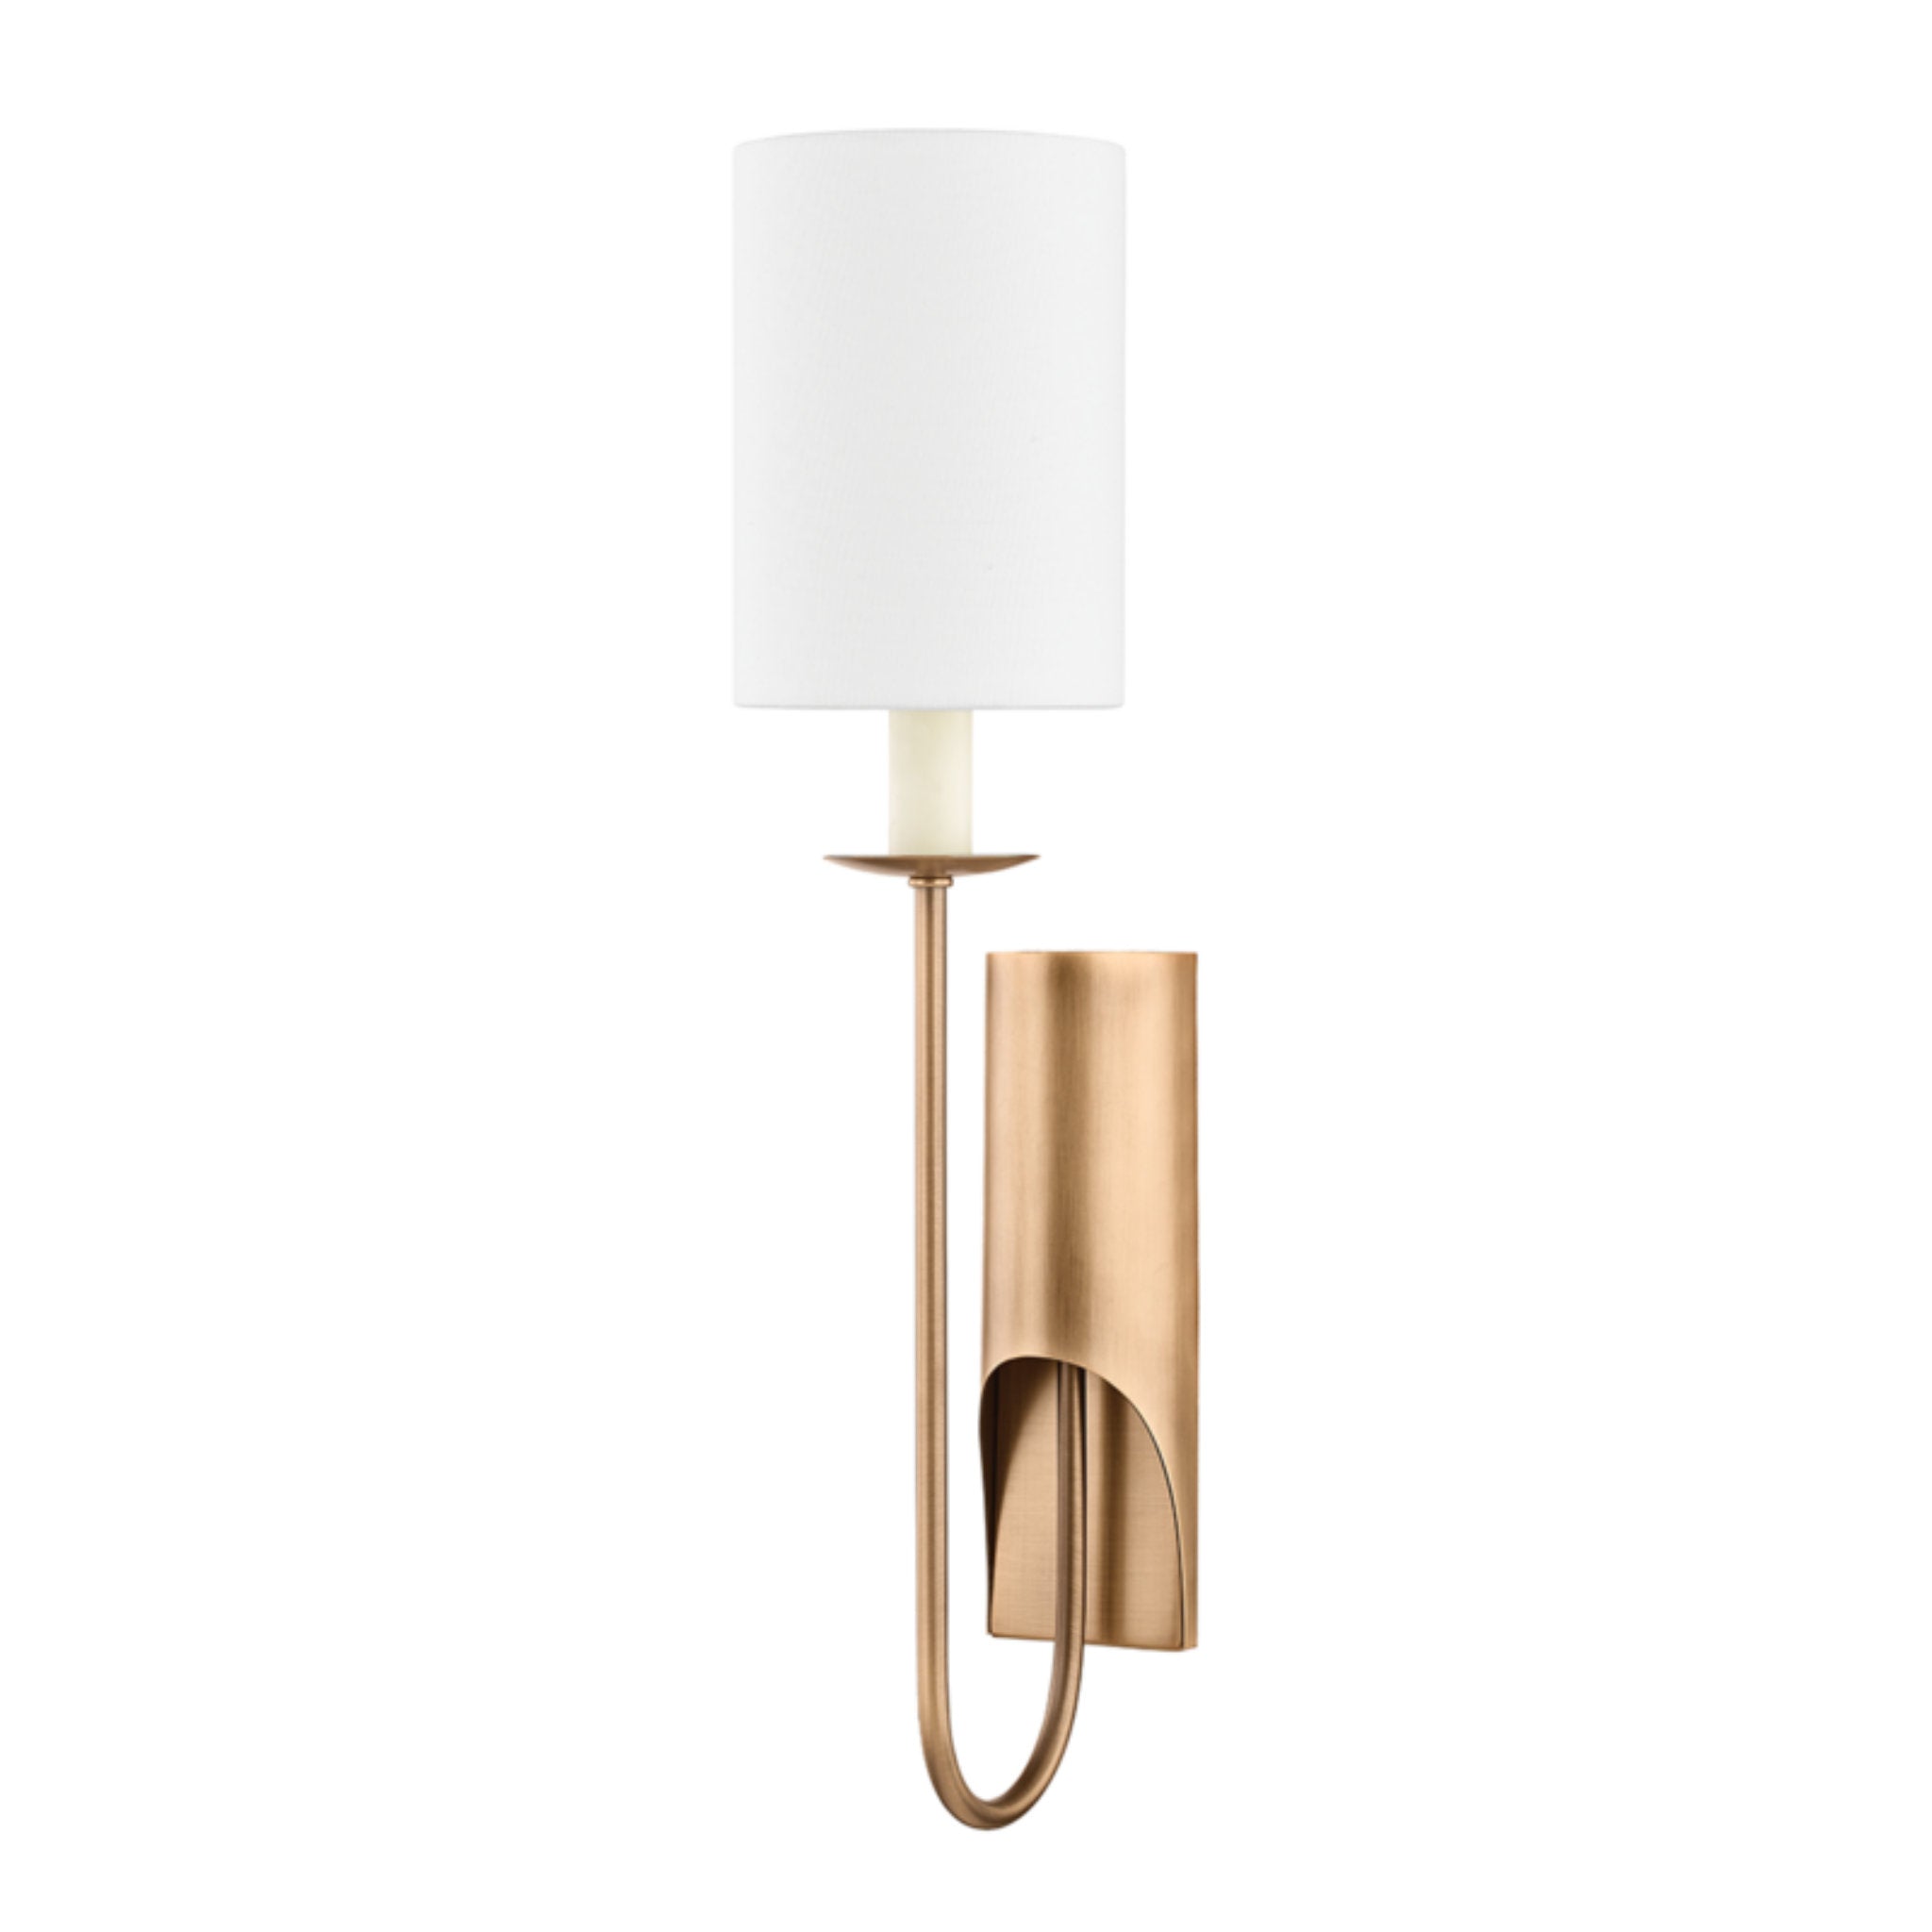 Michas 1 Light Wall Sconce in Patina Brass